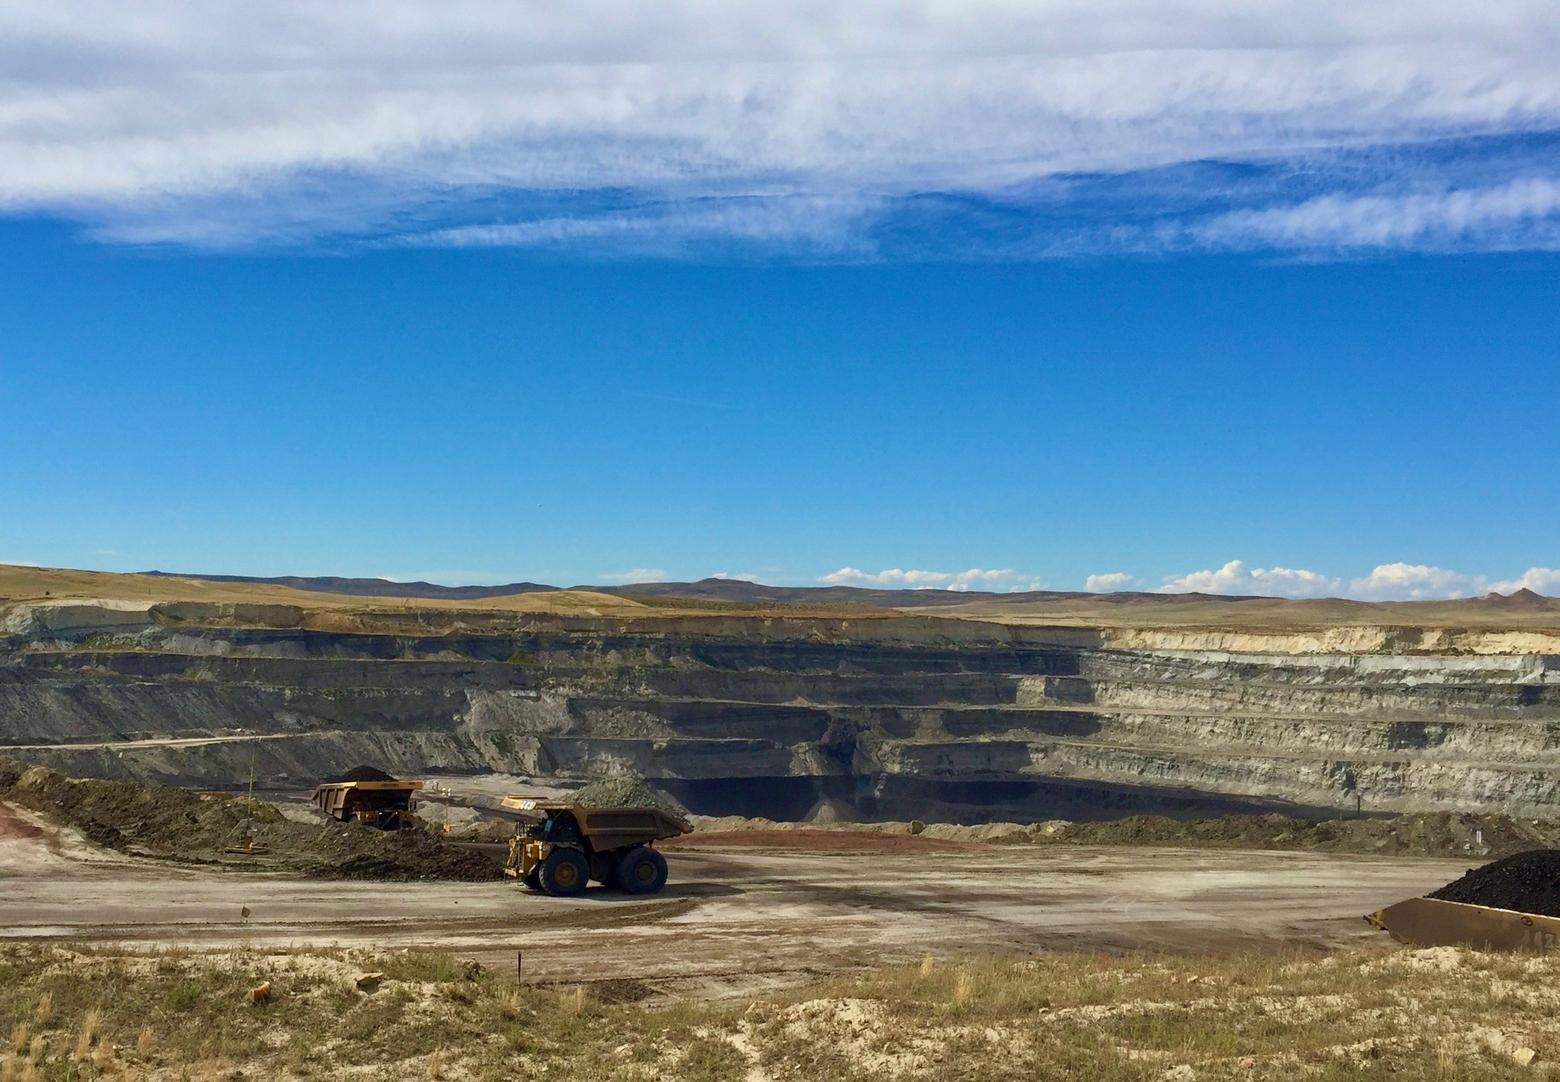 An open pit coal mine in Wyoming's Powder River Basin in 2016. When energy providers and the market switched to natural gas, it rocked the coal industry on its heels and resulted in bankruptcies of several companies operating in the West. Some politicians in Montana, who claim climate change isn't a serious threat, would like to have coal deposits in the state unearthed to fuel coal-fired power plants around the world. Photo by Todd Wilkinson